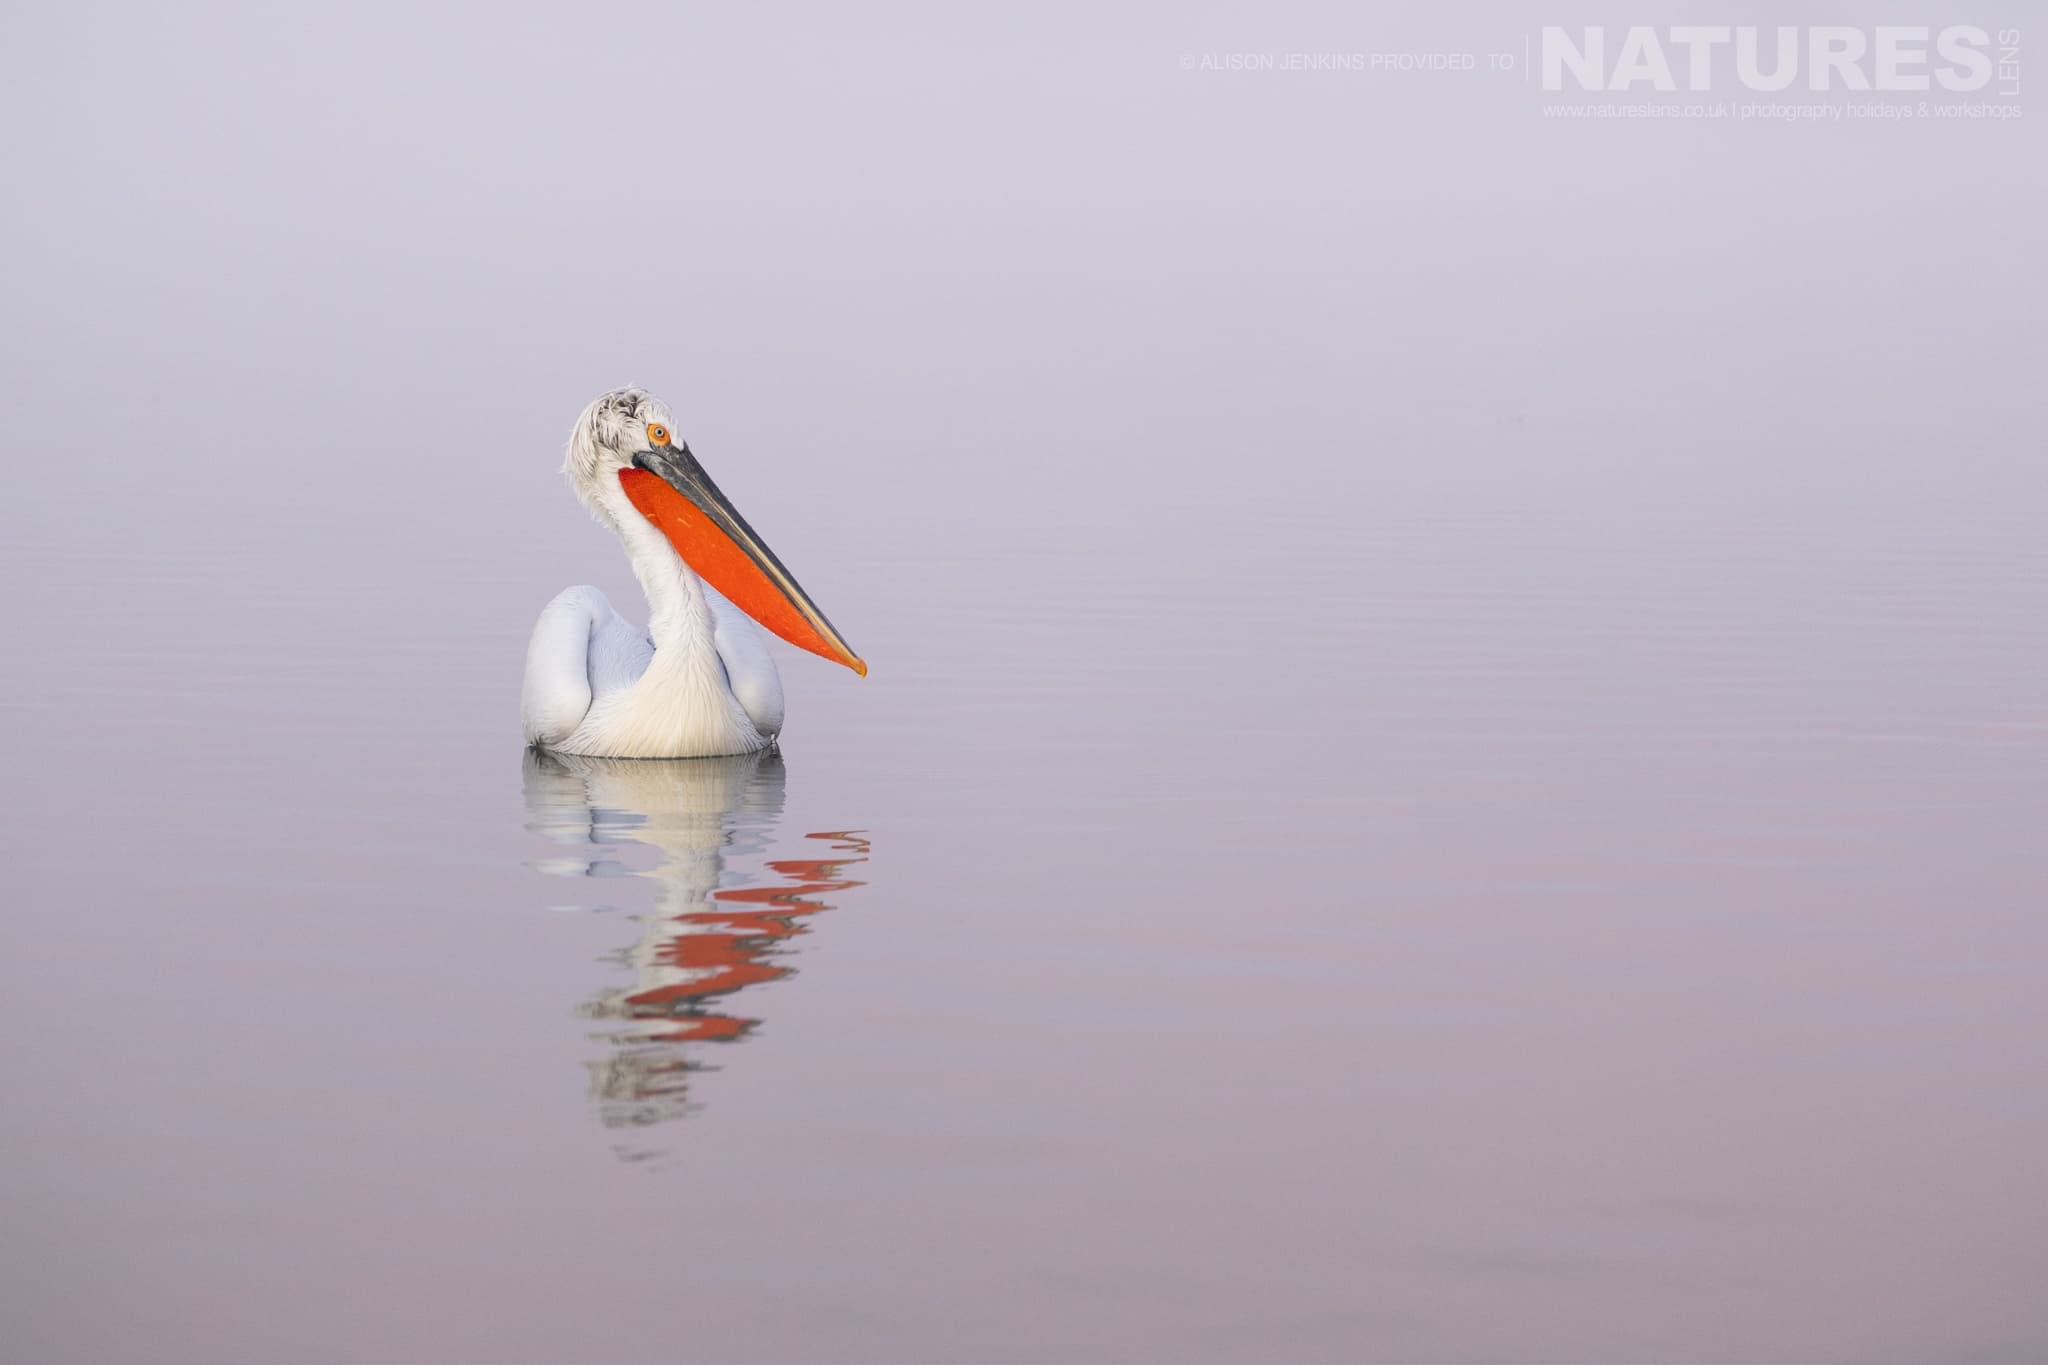 A Solo Pelican Of Lake Kerkini Drifts Serenely On The Waters Of The Lake Photographed During A Natureslens Wildlife Photography Holiday